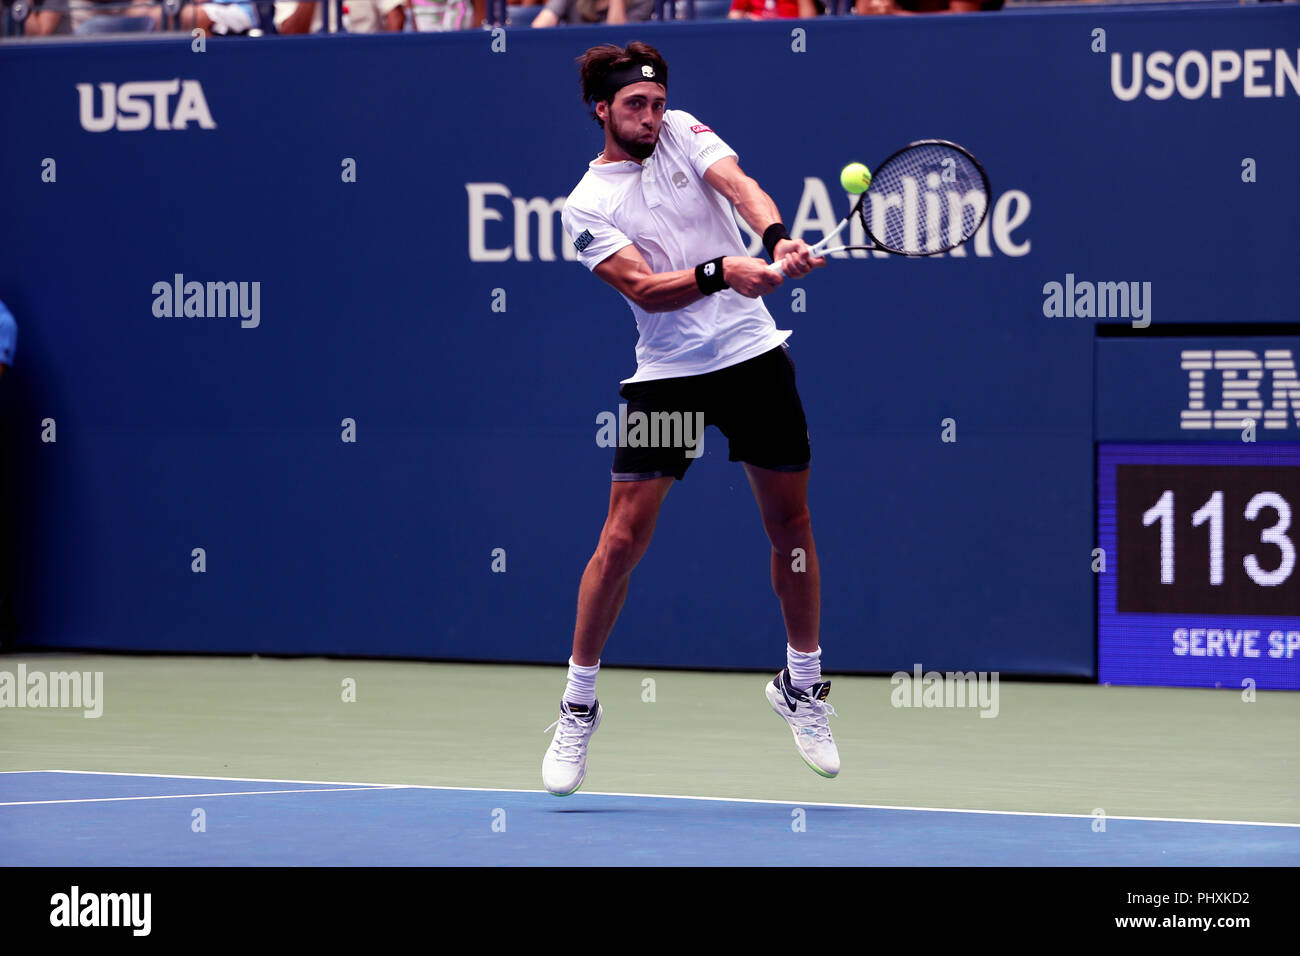 New York, United States. 02nd Sep, 2018. Flushing Meadows, New York - September 2, 2018: US Open Tennis: Nikoloz Basilashvili of the Republic of Georgia returns the ball to number 1 seed Rafael Nadal during their fourth round match at the US Open in Flushing Meadows, New York. Nadal won in four sets. Credit: Adam Stoltman/Alamy Live News Stock Photo